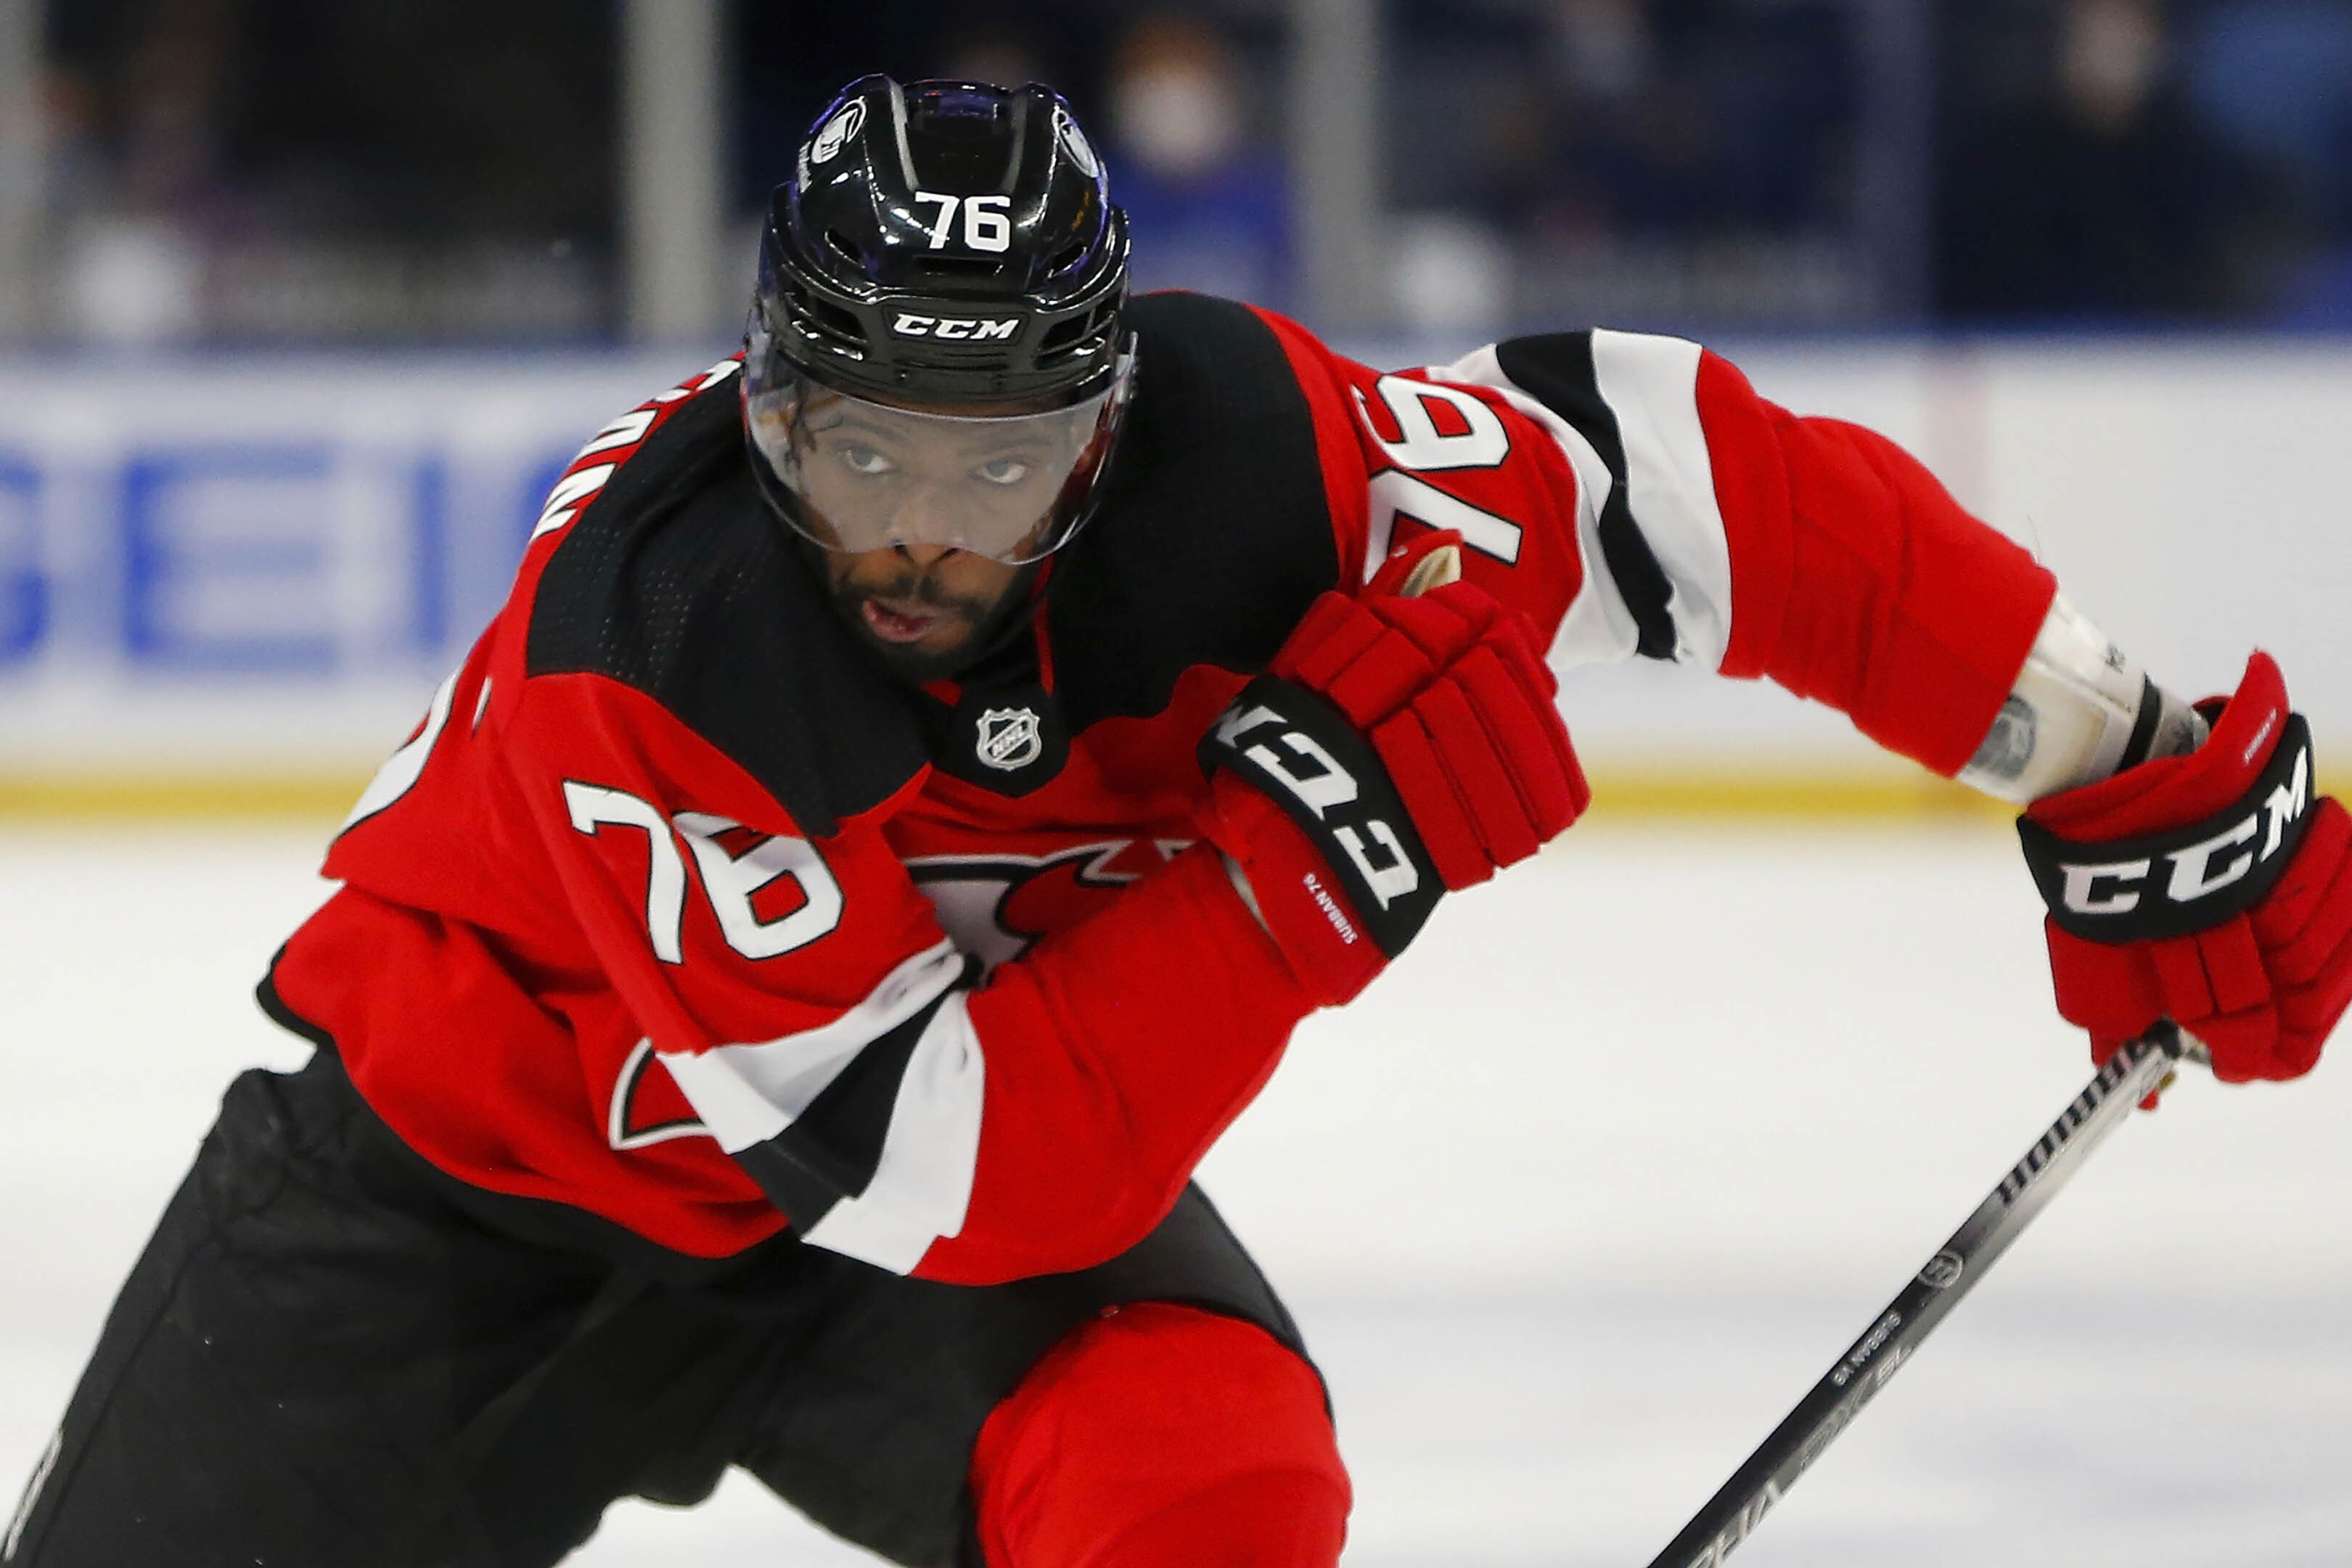 P.K. Subban can still help the New Jersey Devils in 2020-21